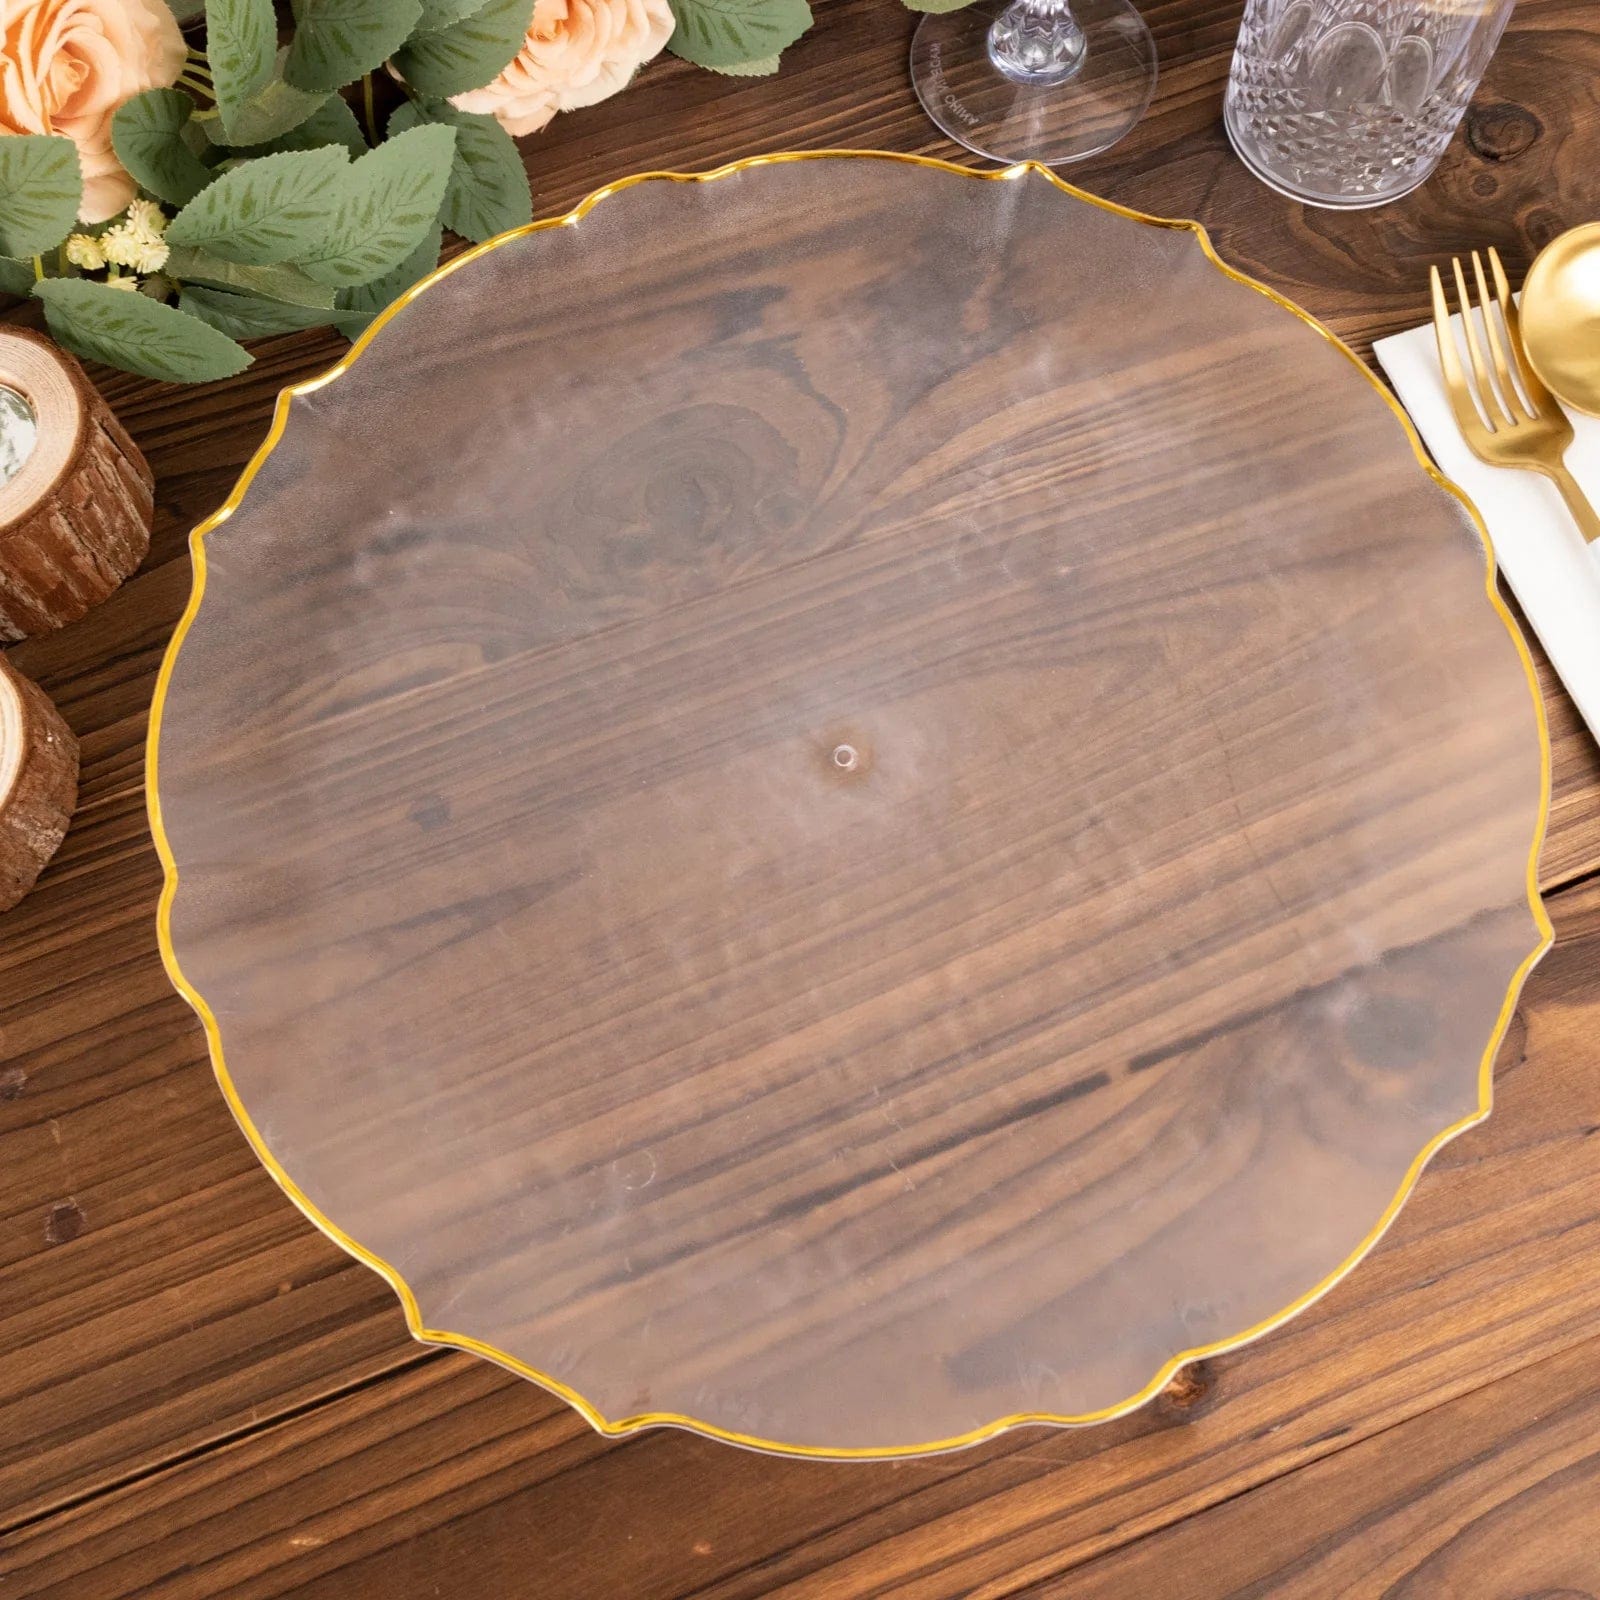 6 Clear 13 in Round Plastic Charger Plates with Gold Scalloped Rim